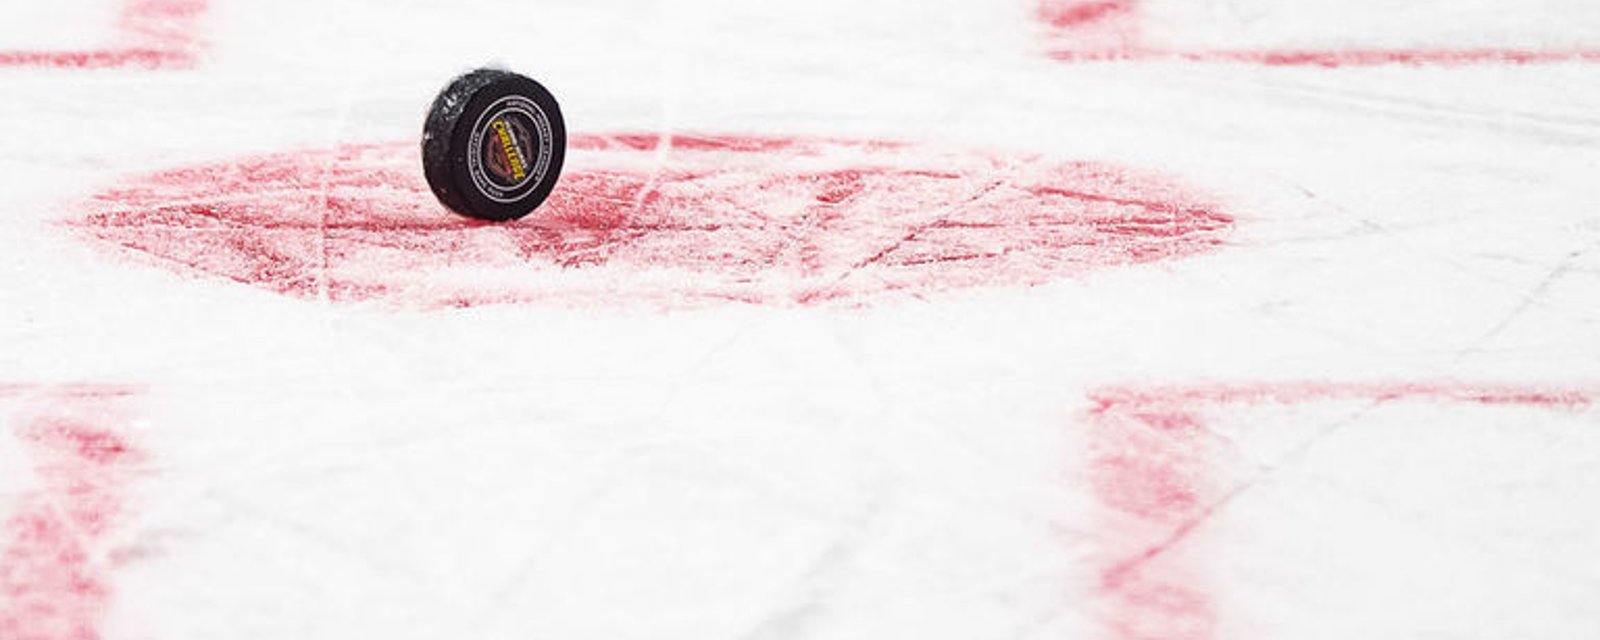 Former player accuses prominent hockey people of horrific sexual abuse 